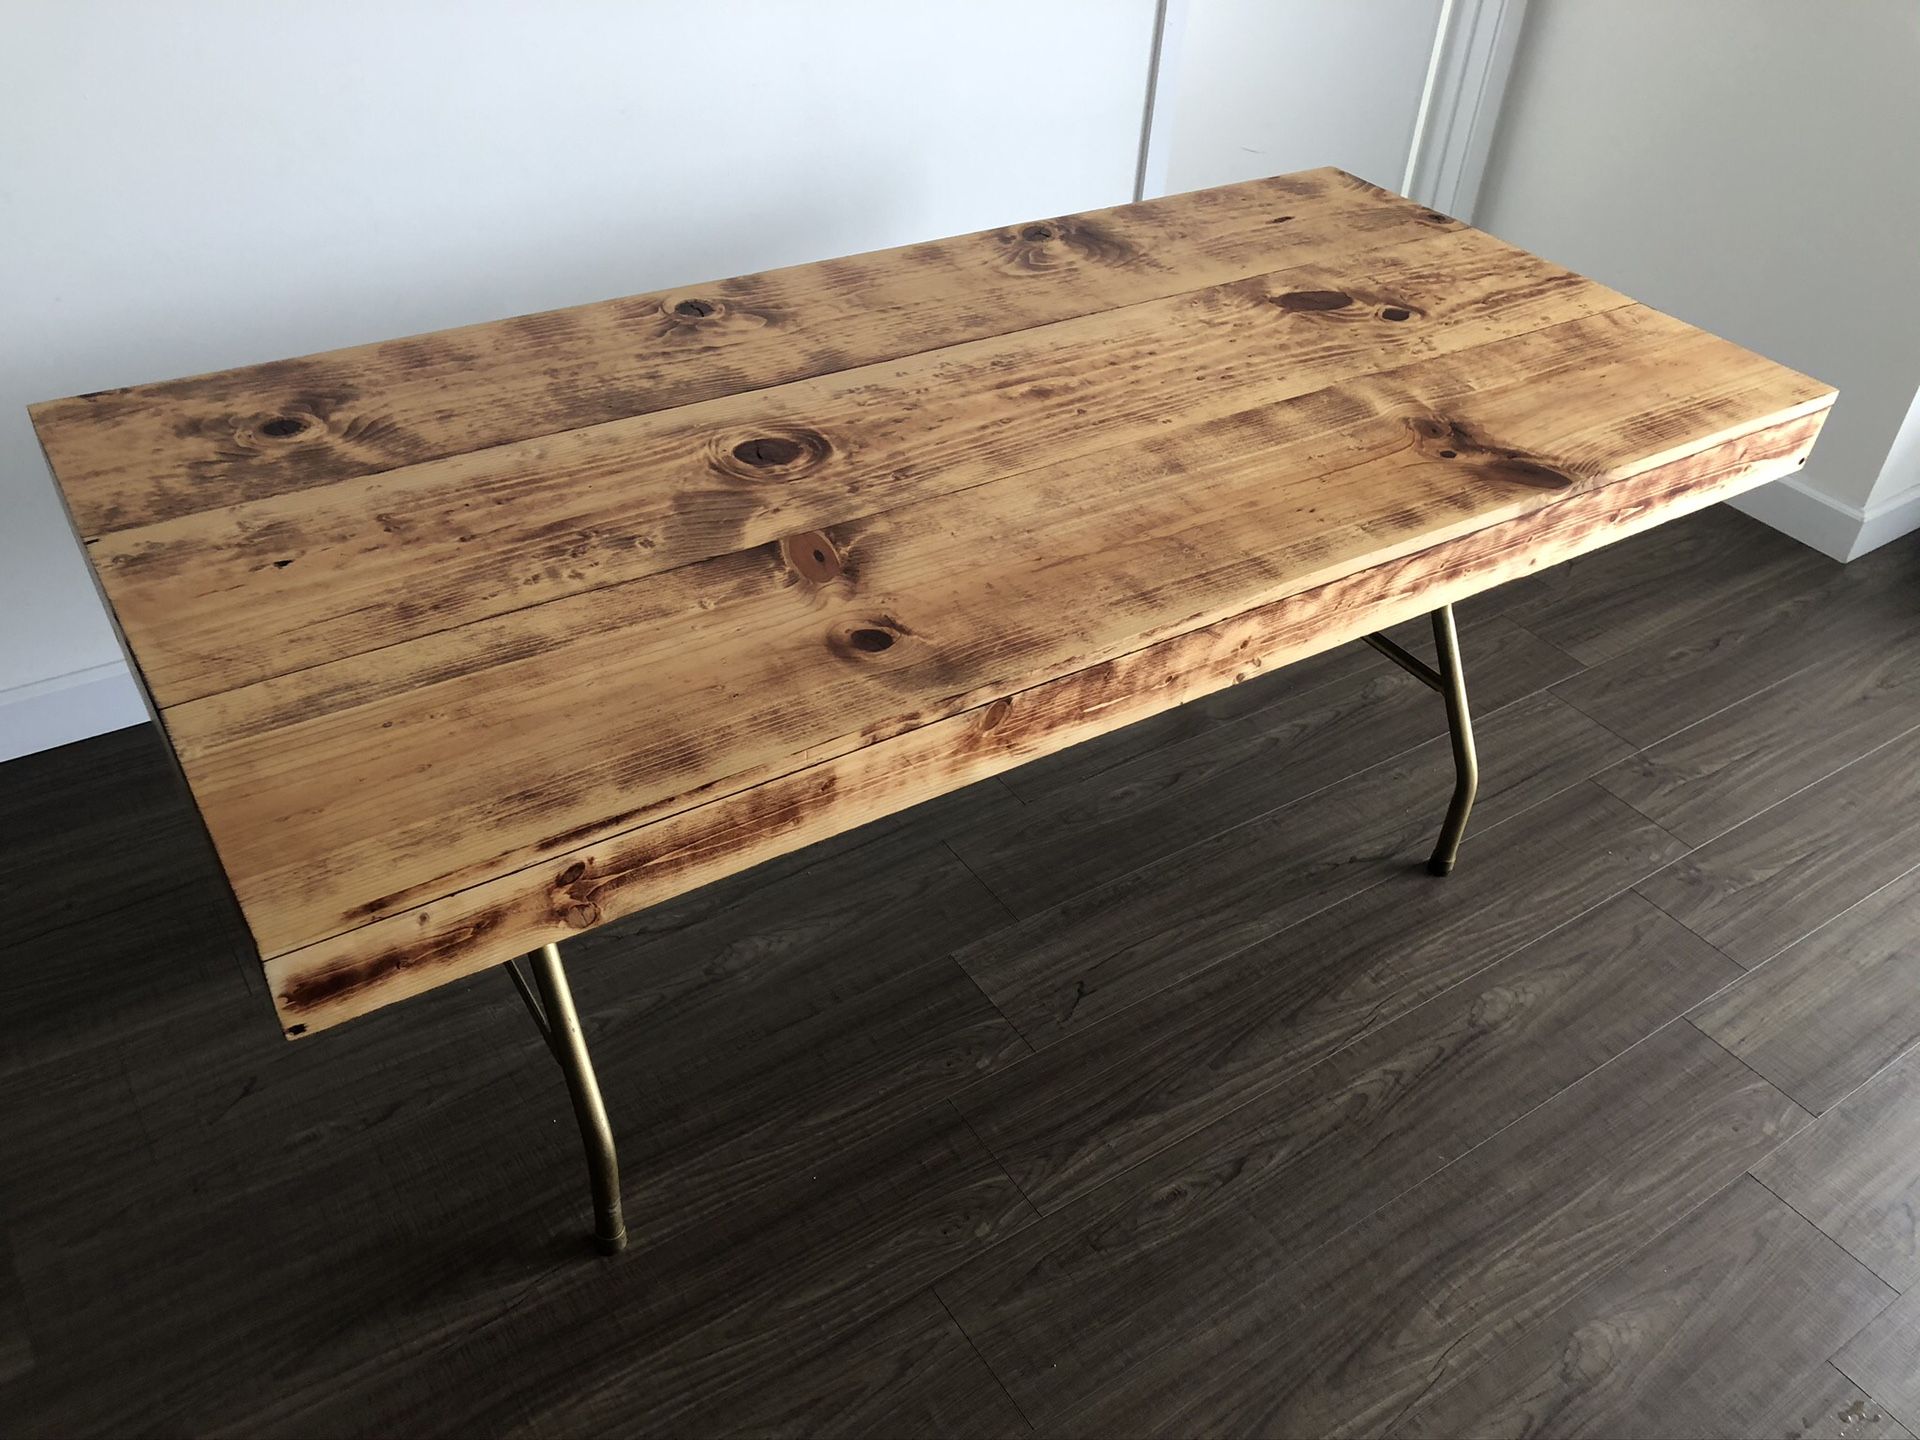 Super practical table, excellent for study/dinner/meetings. 34”x72”